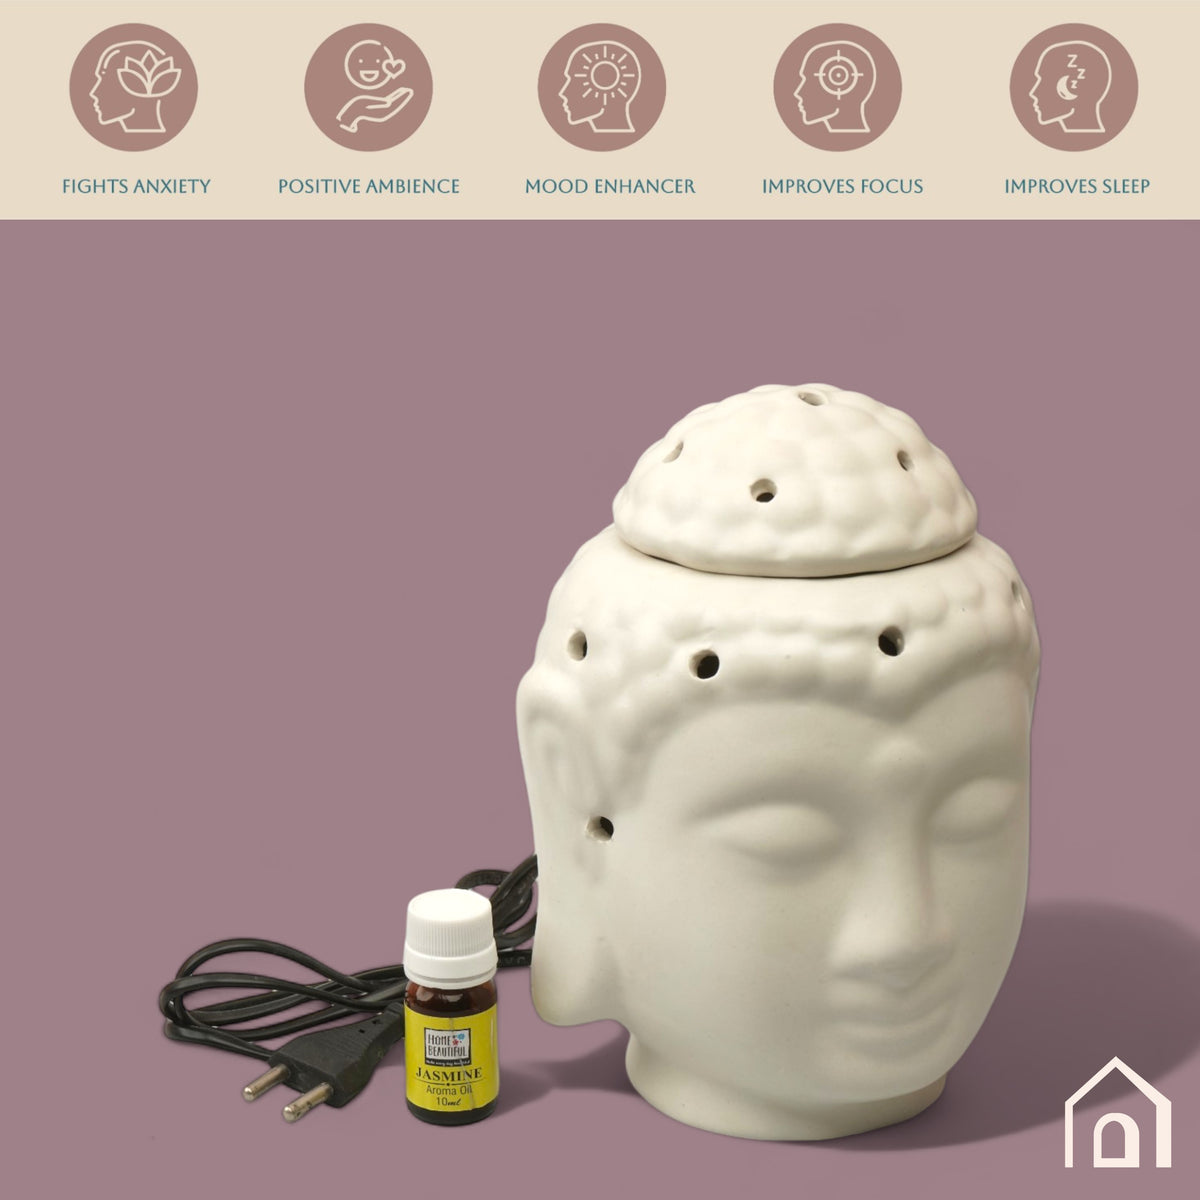 Claymistry Ceramic Electric Ivory Aroma Buddha Lamp Diffuser | 18cm * 18cm * 20cm | Matte Finish | Aroma Oil Burner for Aromatherapy | Home Decor and Fragrance with Aroma Oil (Jasmine Fragrance 10 ml)